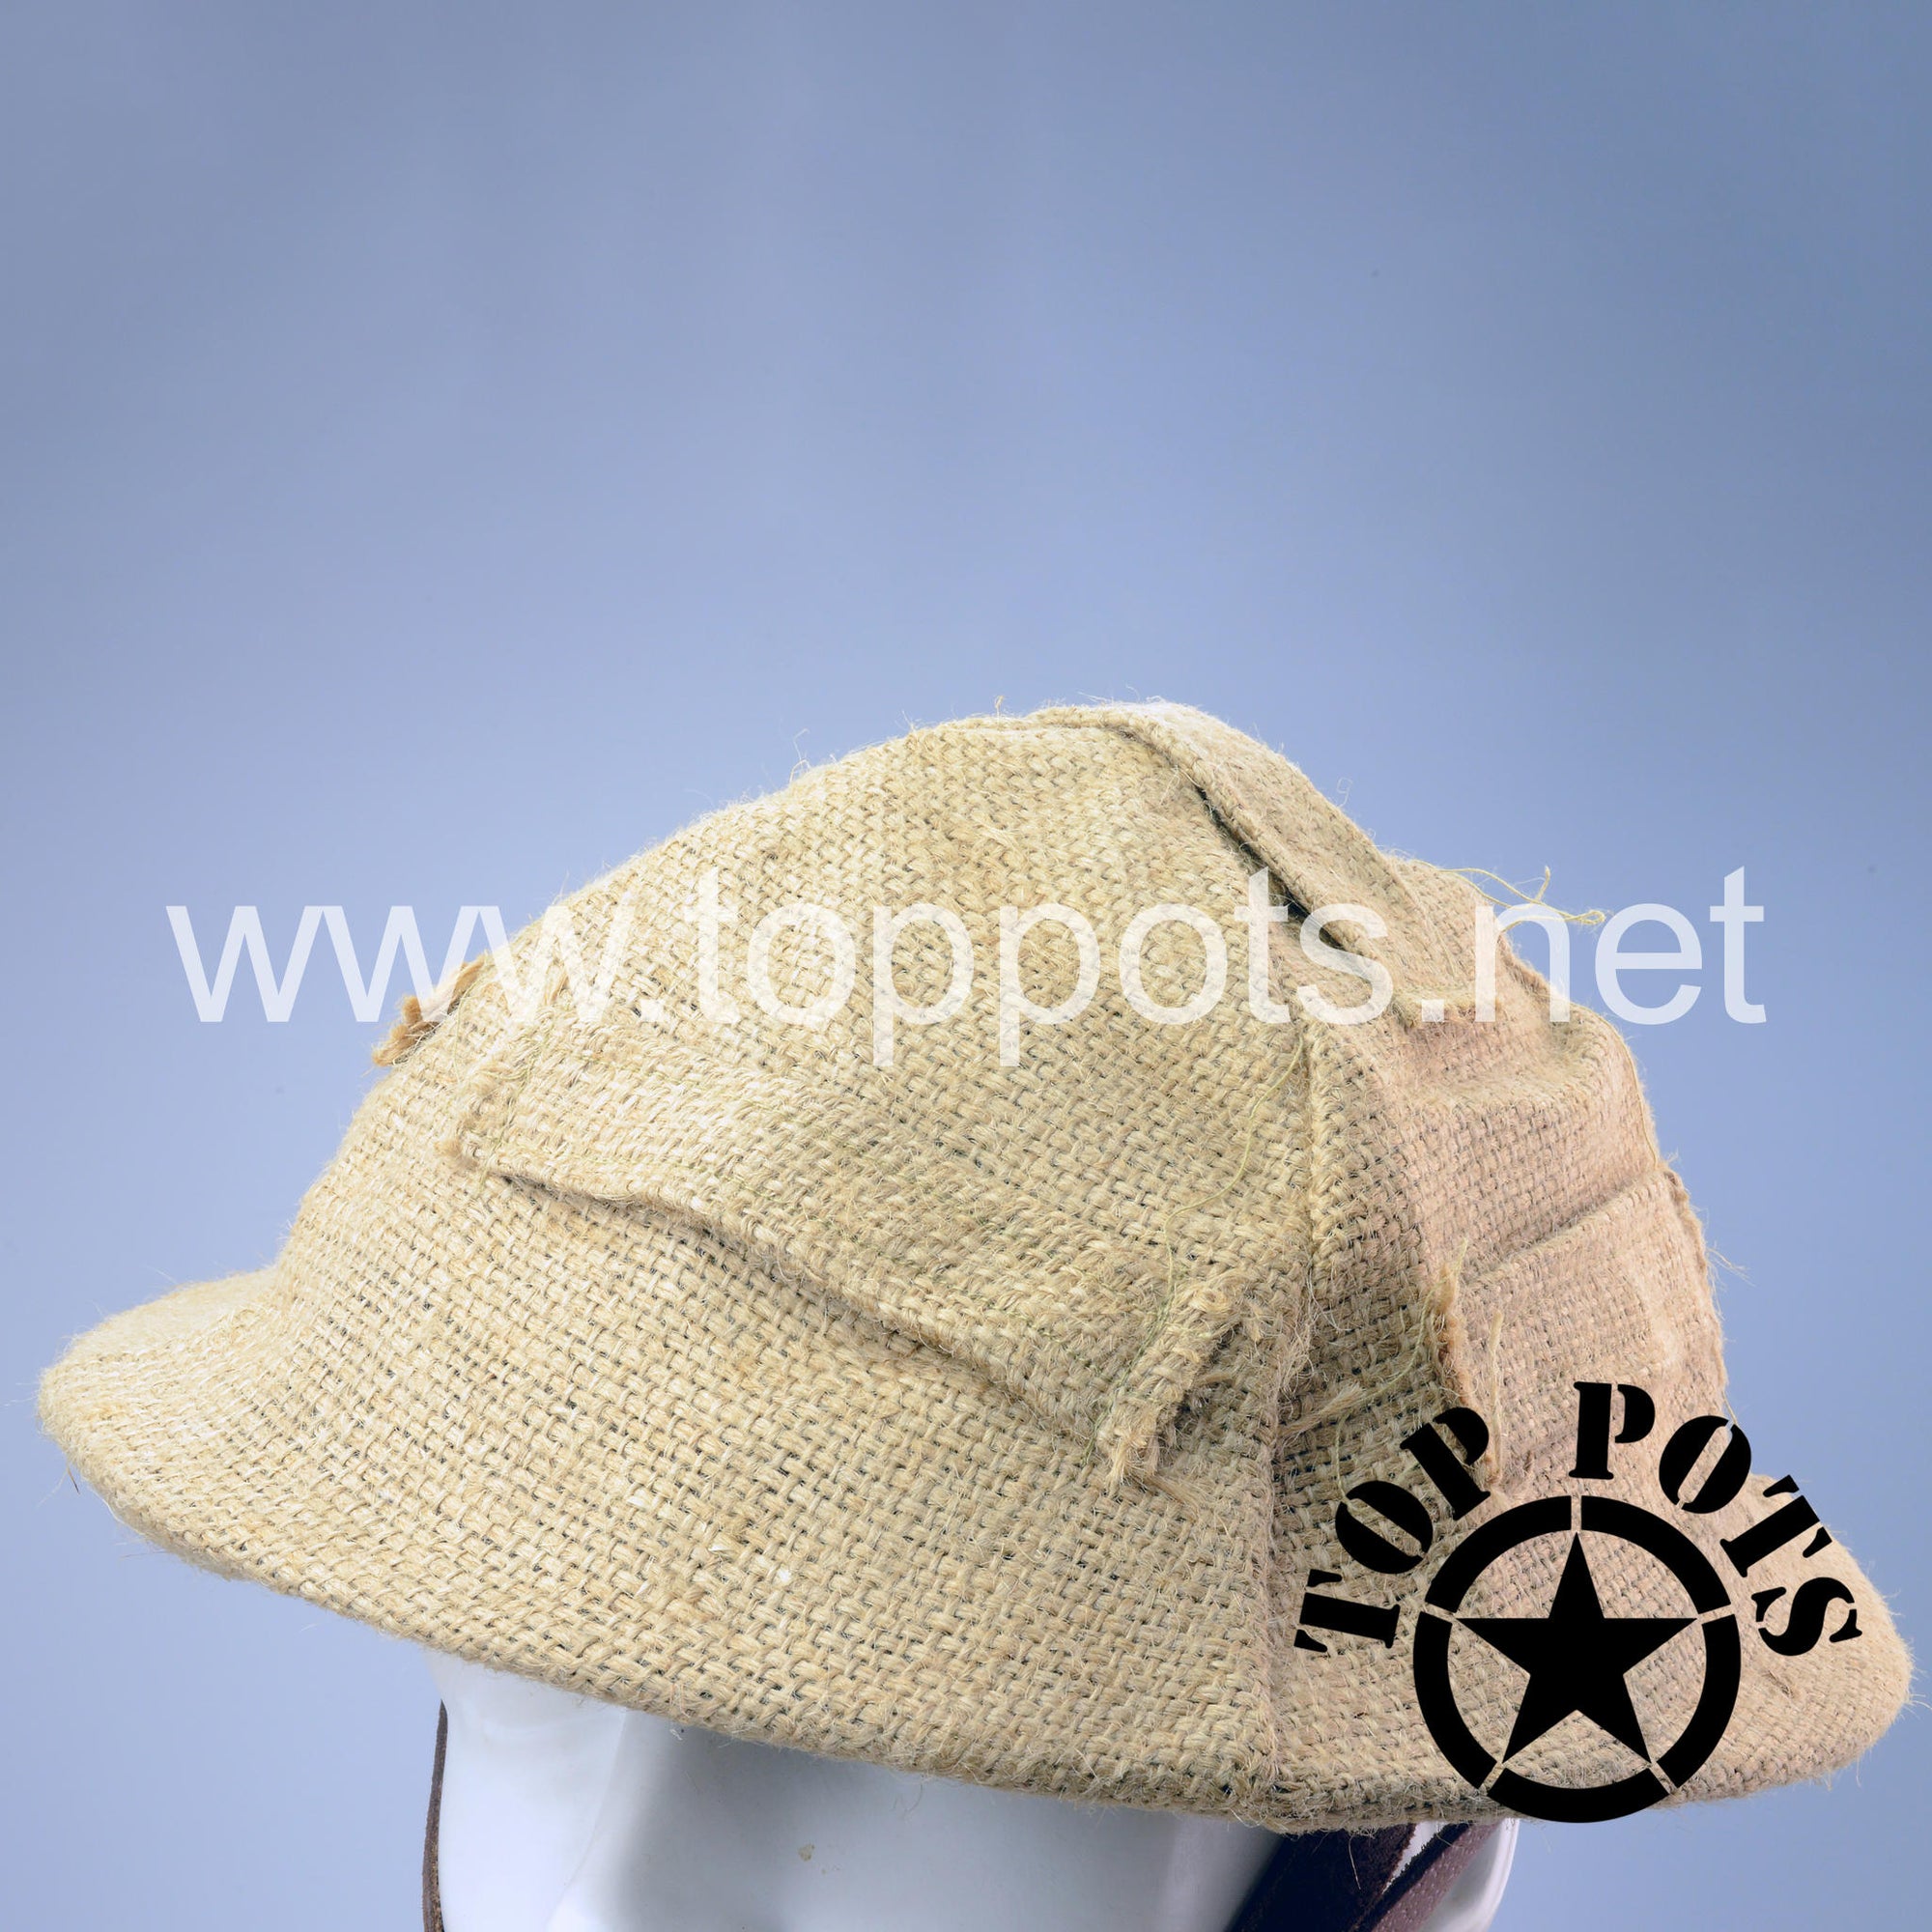 WWI Canadian Army Reproduction M1916 MKI Enlisted Brodie Helmet with Burlap Cover – Textured Finish